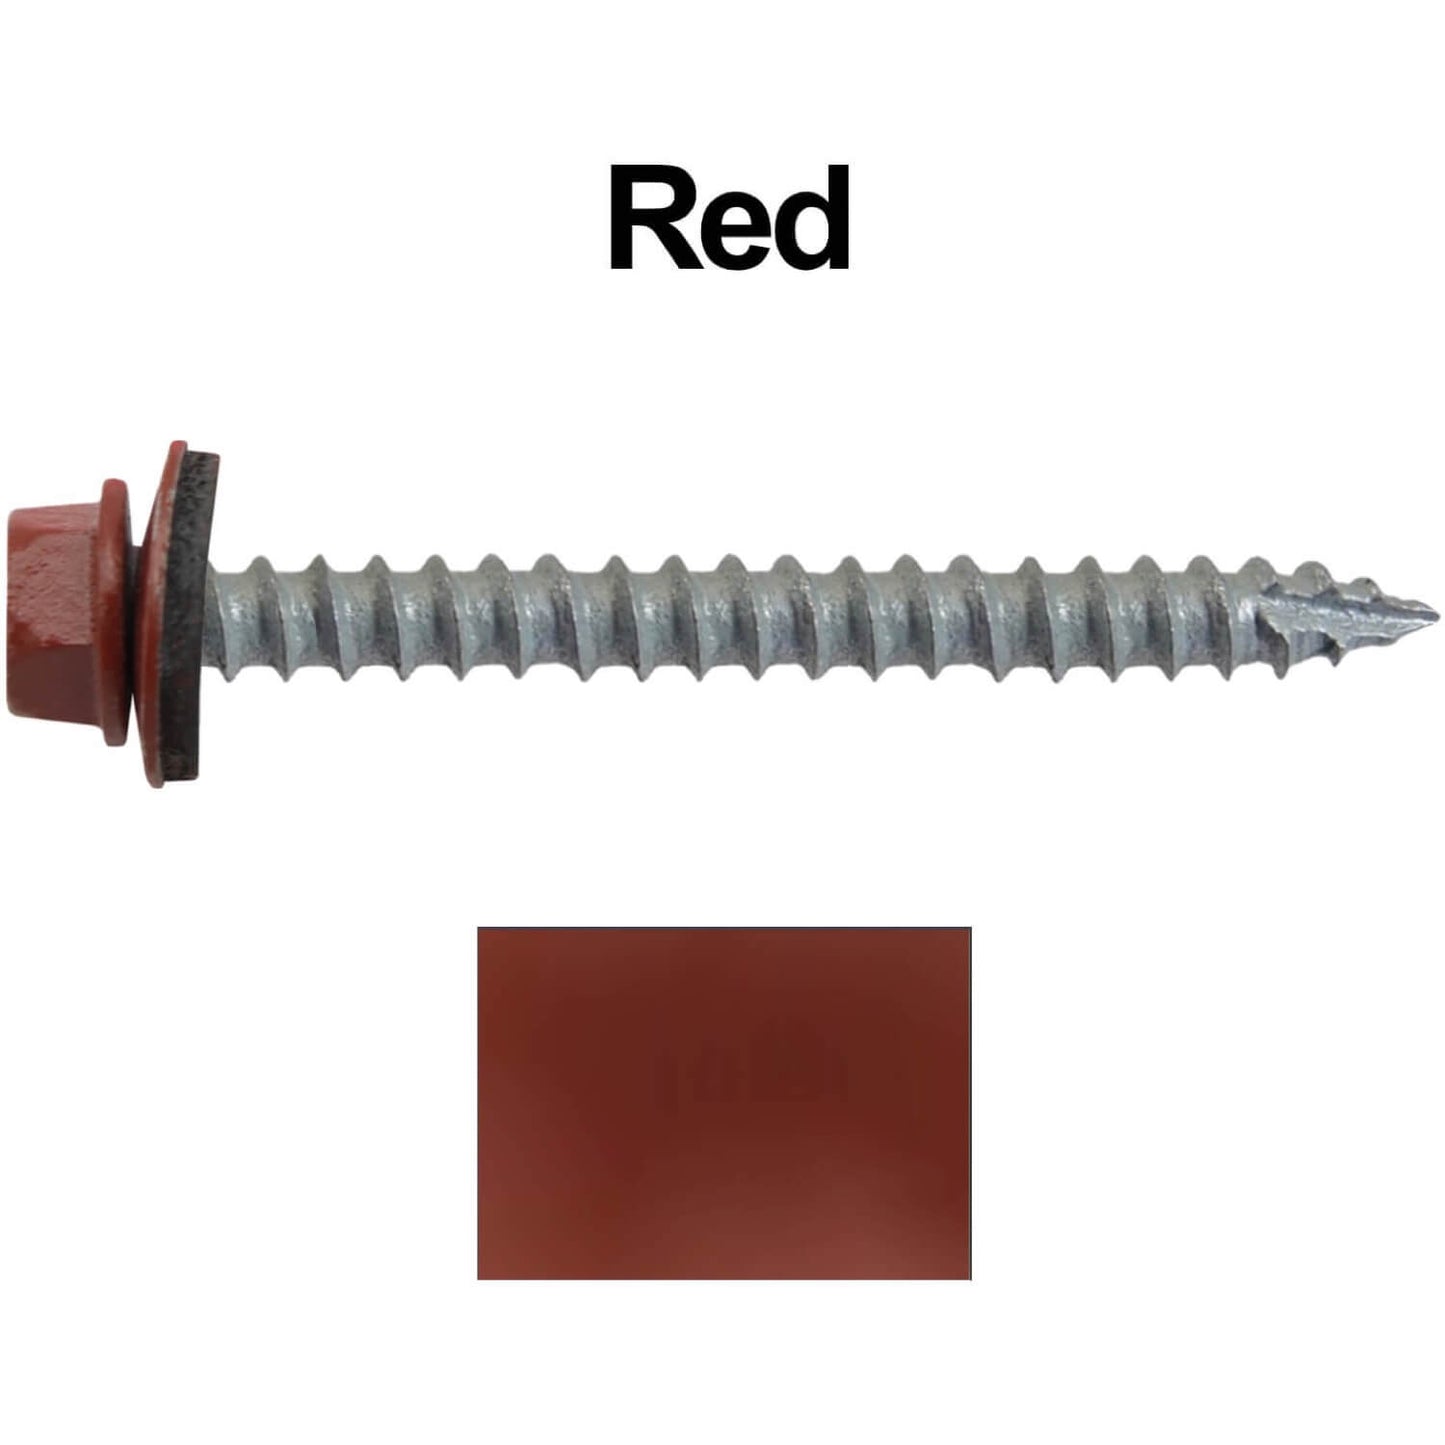 #14  x 2-1/2" Metal ROOFING SCREWS: (250) Screws Hex Head Sheet Metal Roof Screw. Self starting metal to wood sheet metal screws with EPDM washer. For corrugated roofing